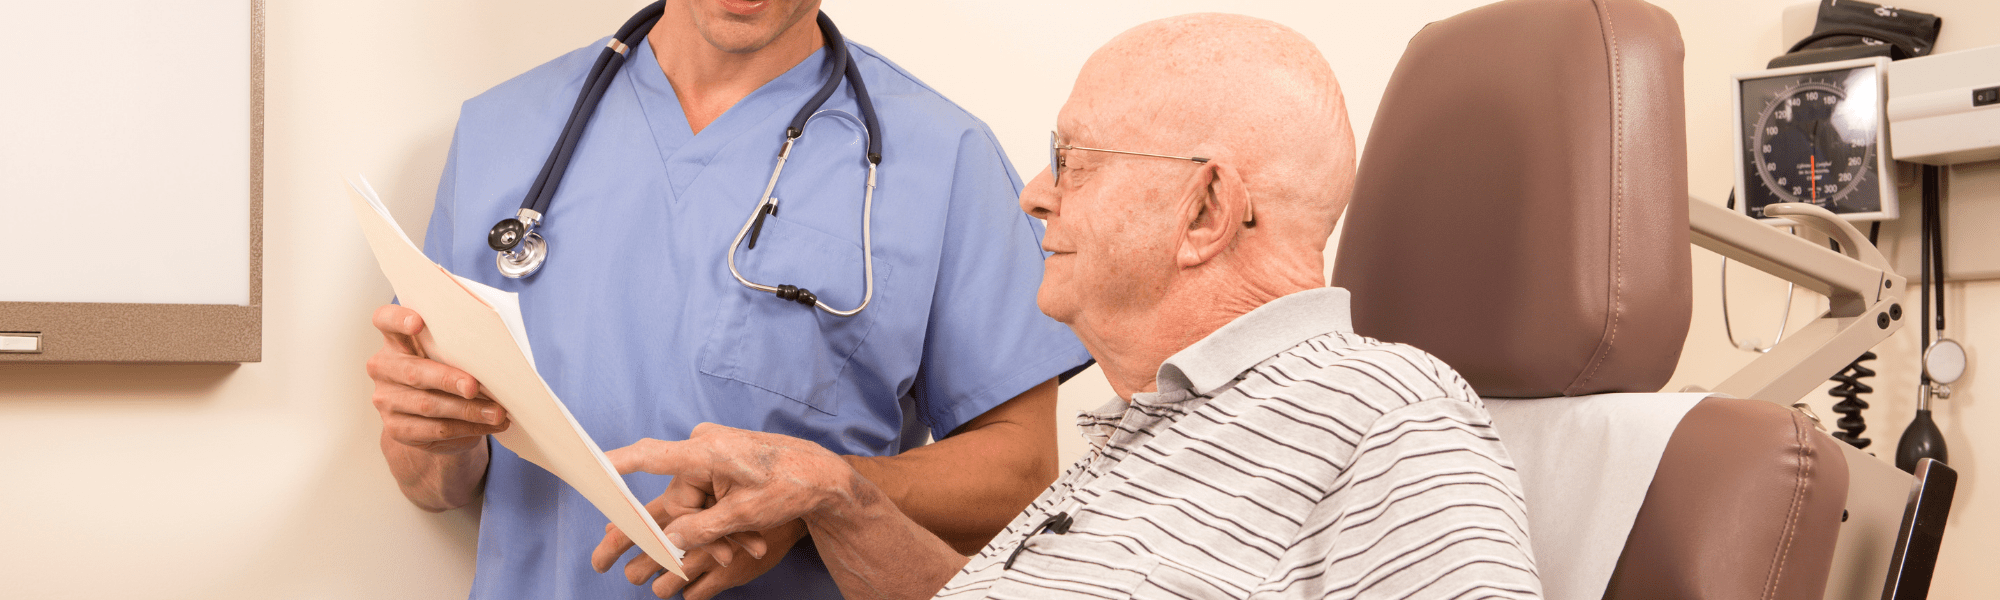 elderly man at the doctor reviewing paperwork 